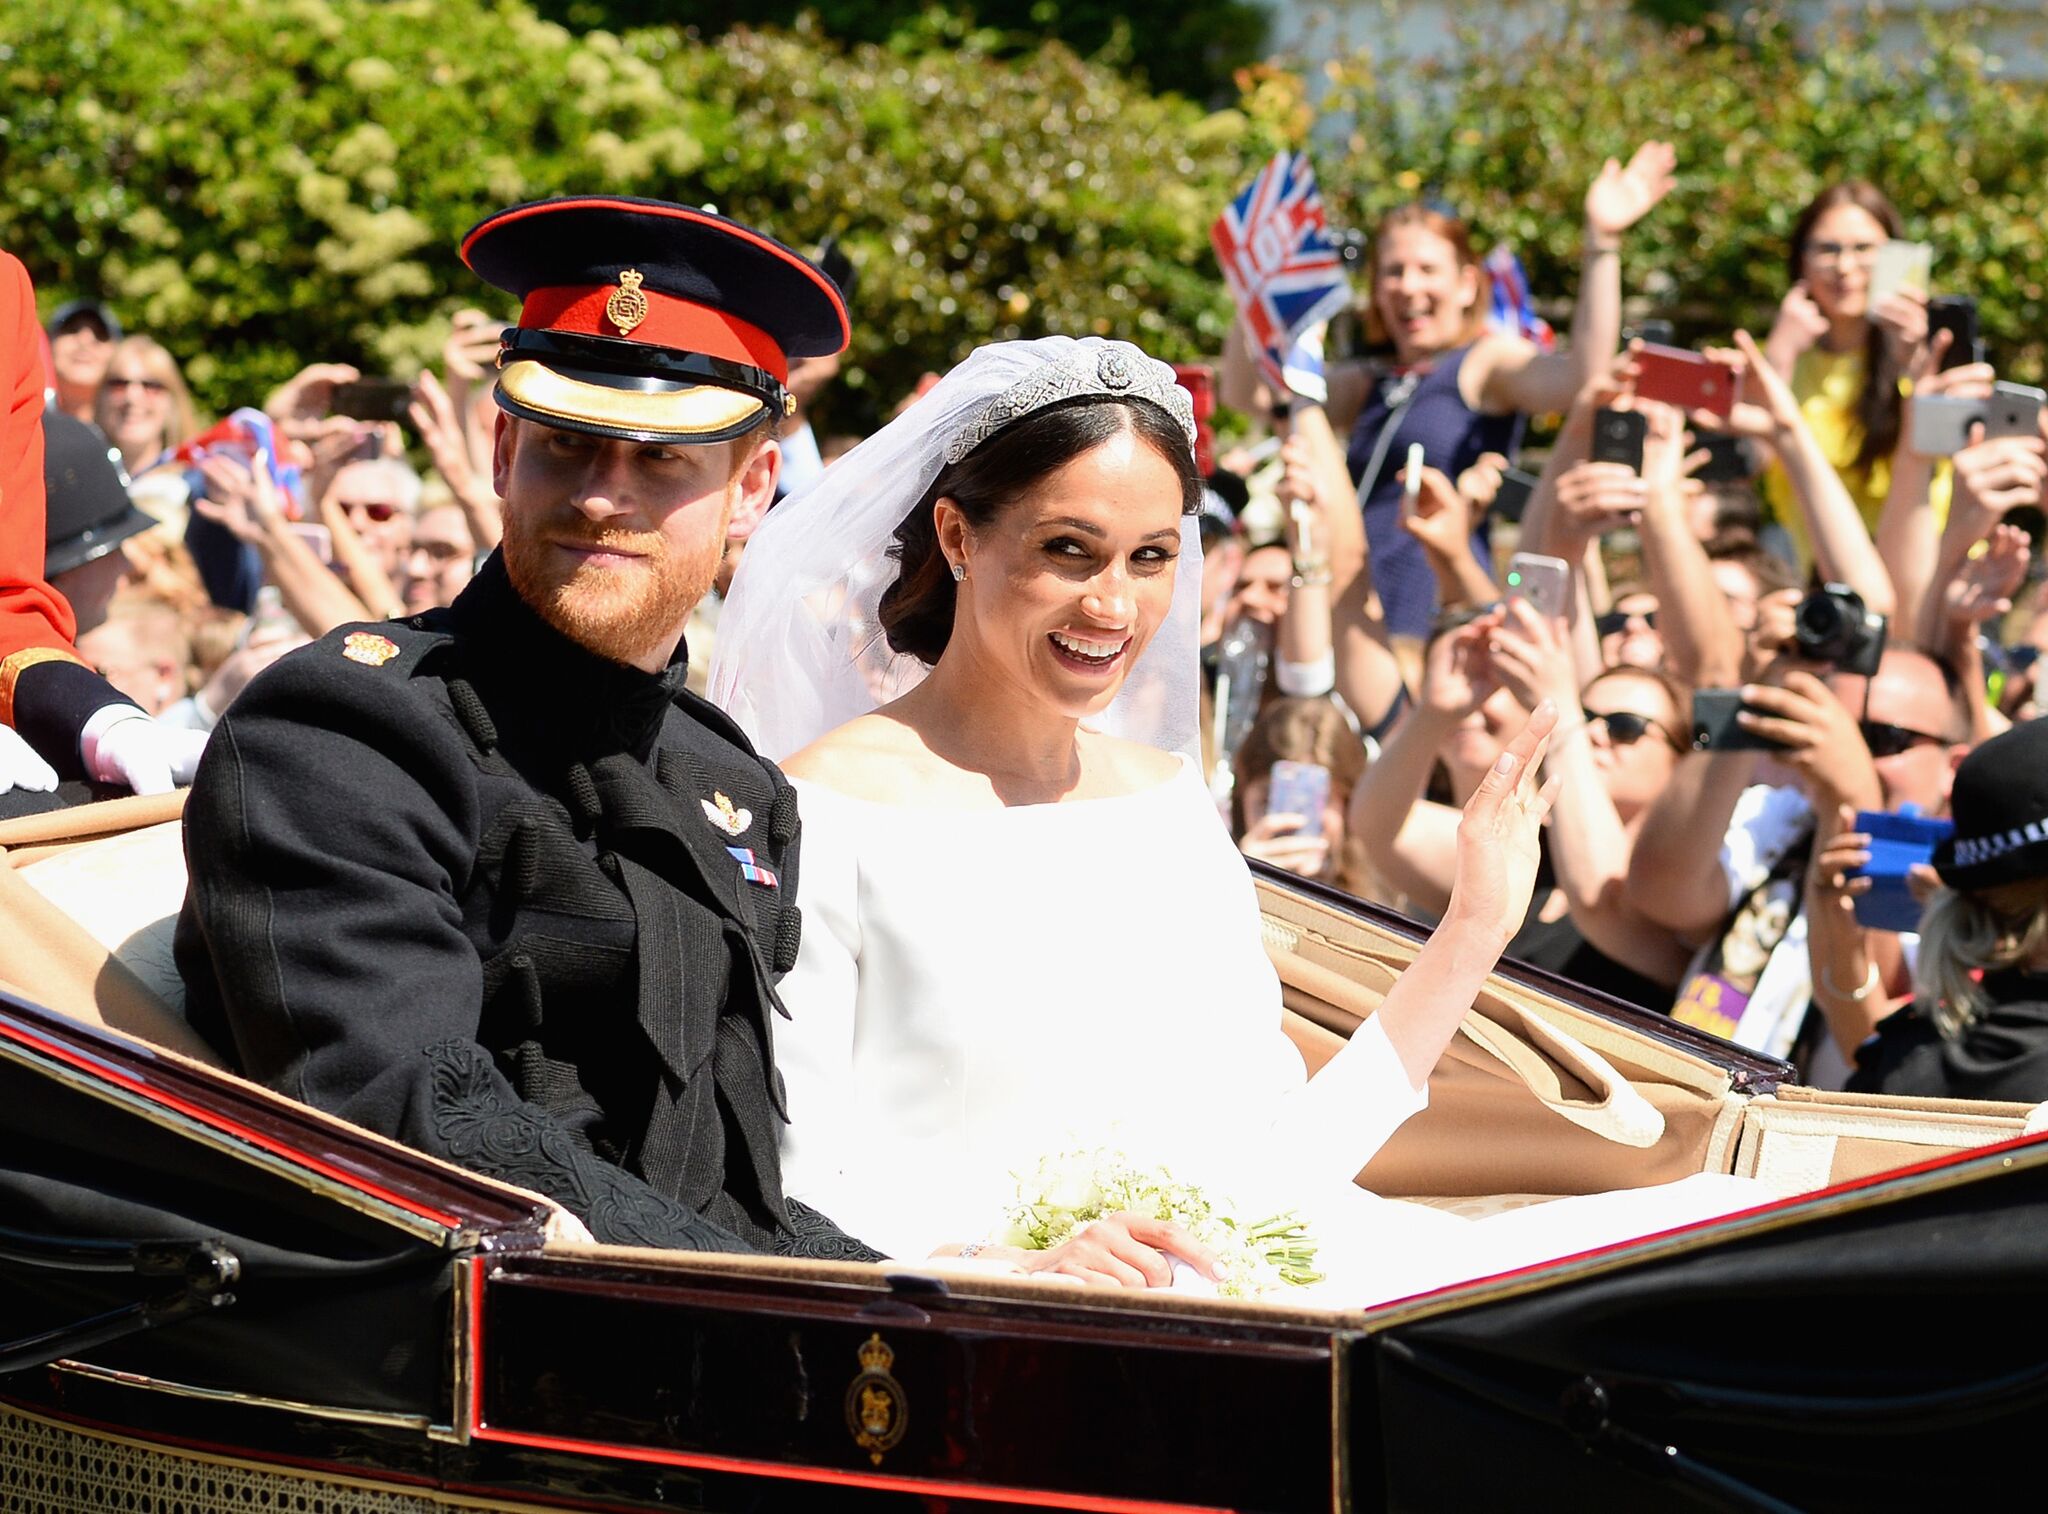 Prince Harry and Meghan Markle on their wedding day | Getty Images